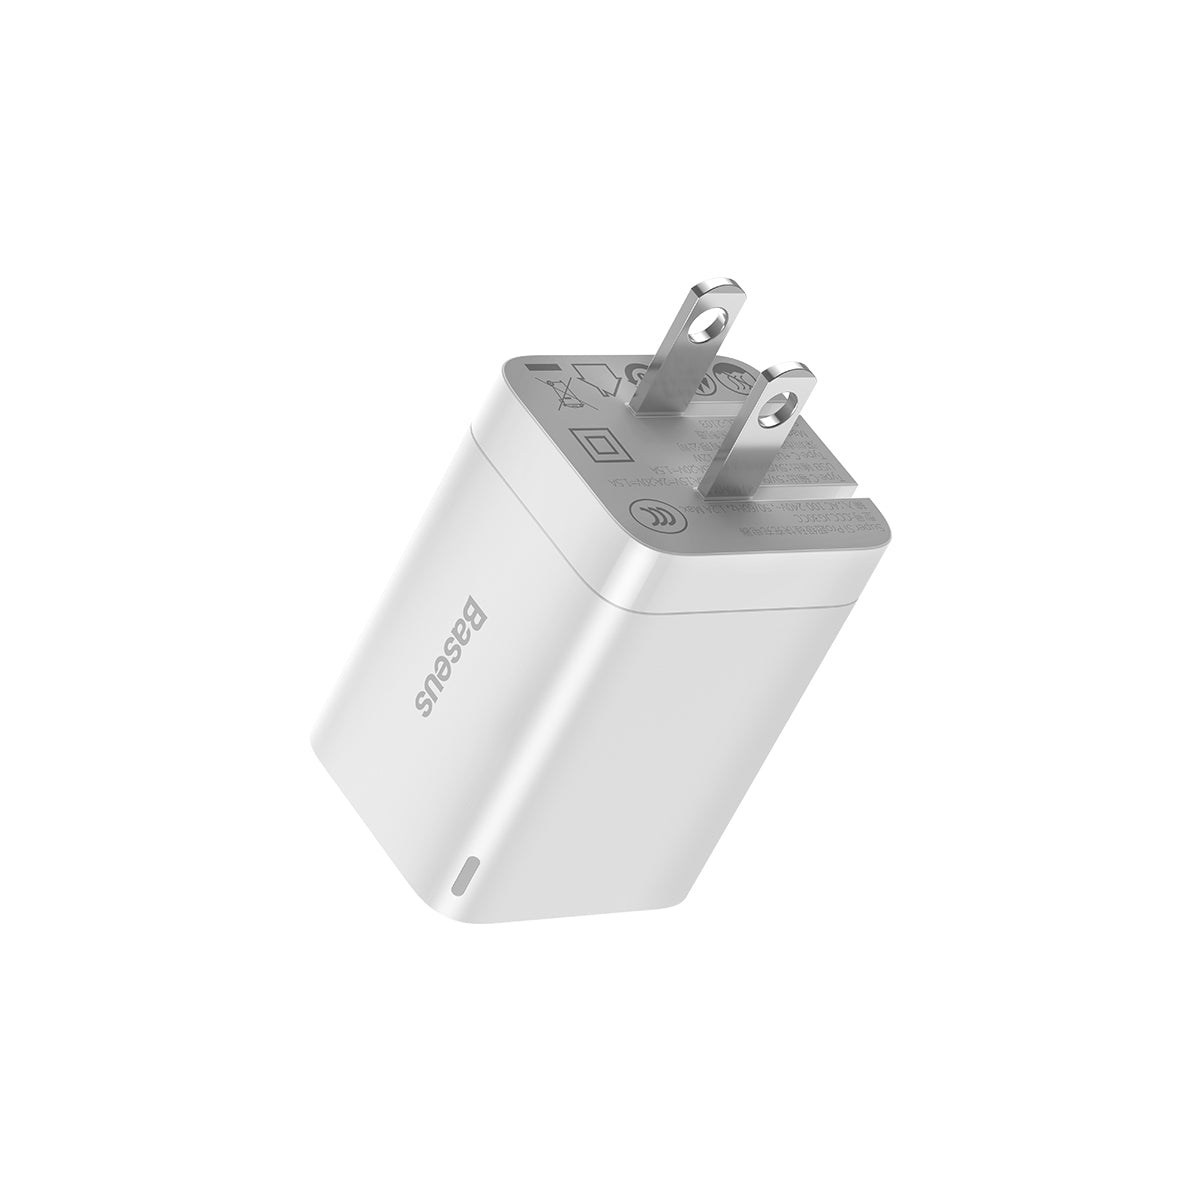 baseus_super_si_pro_dual_port_fast_charger_30w_with_folding_plug_white